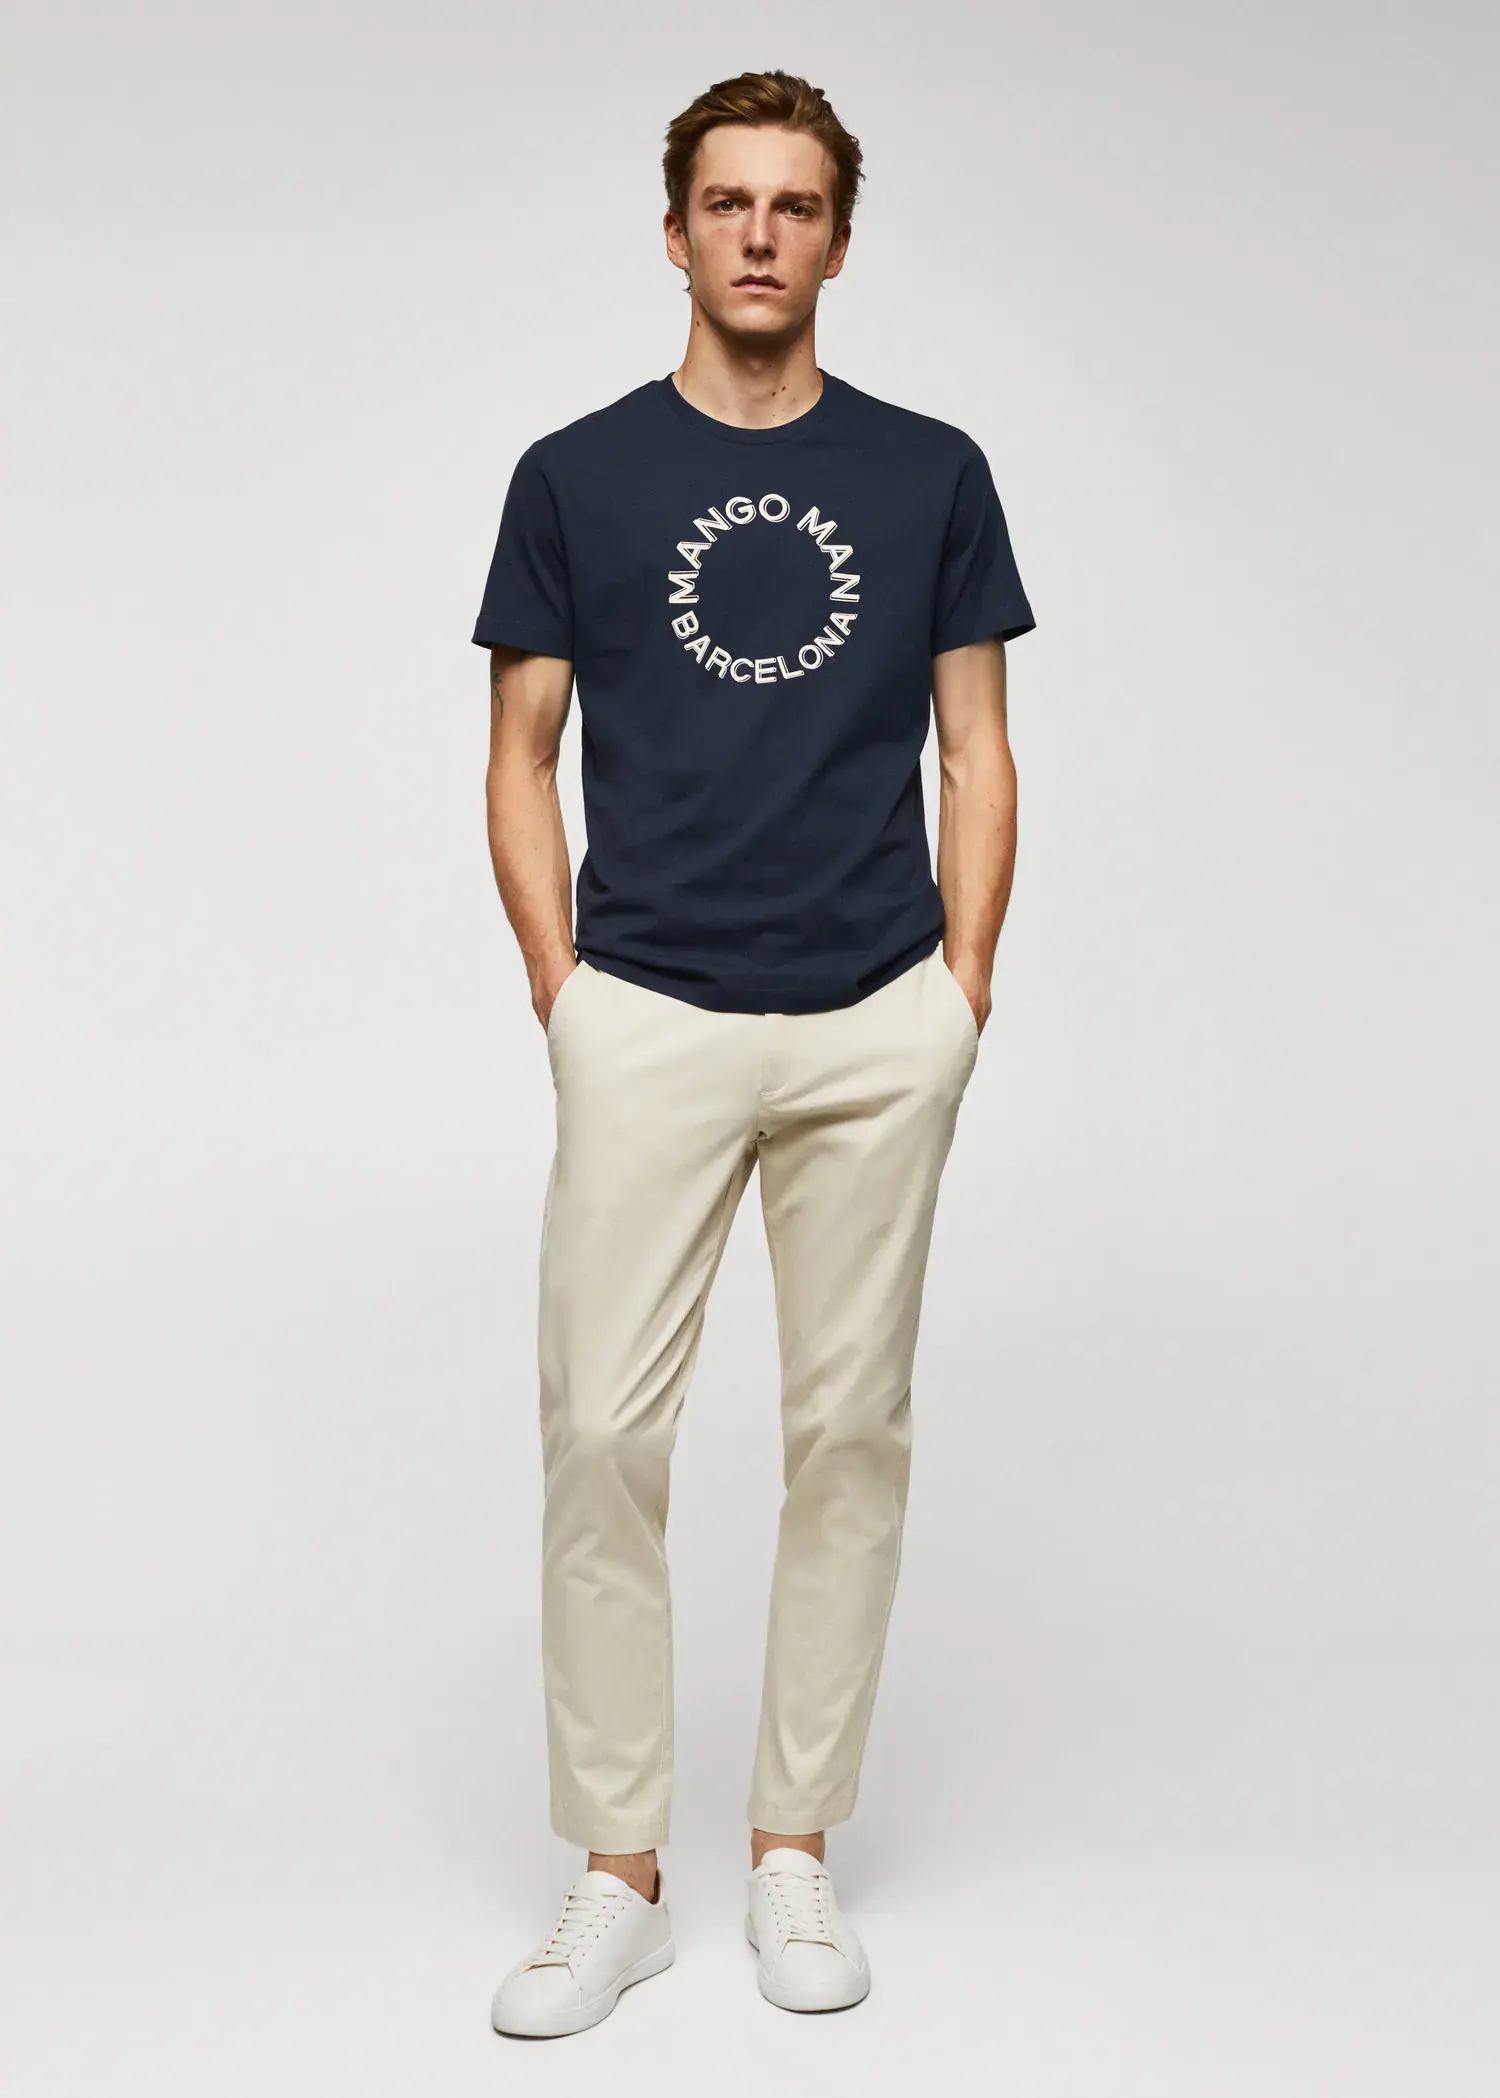 Mango 100% cotton t-shirt with logo. a man in a navy blue t-shirt and beige pants. 